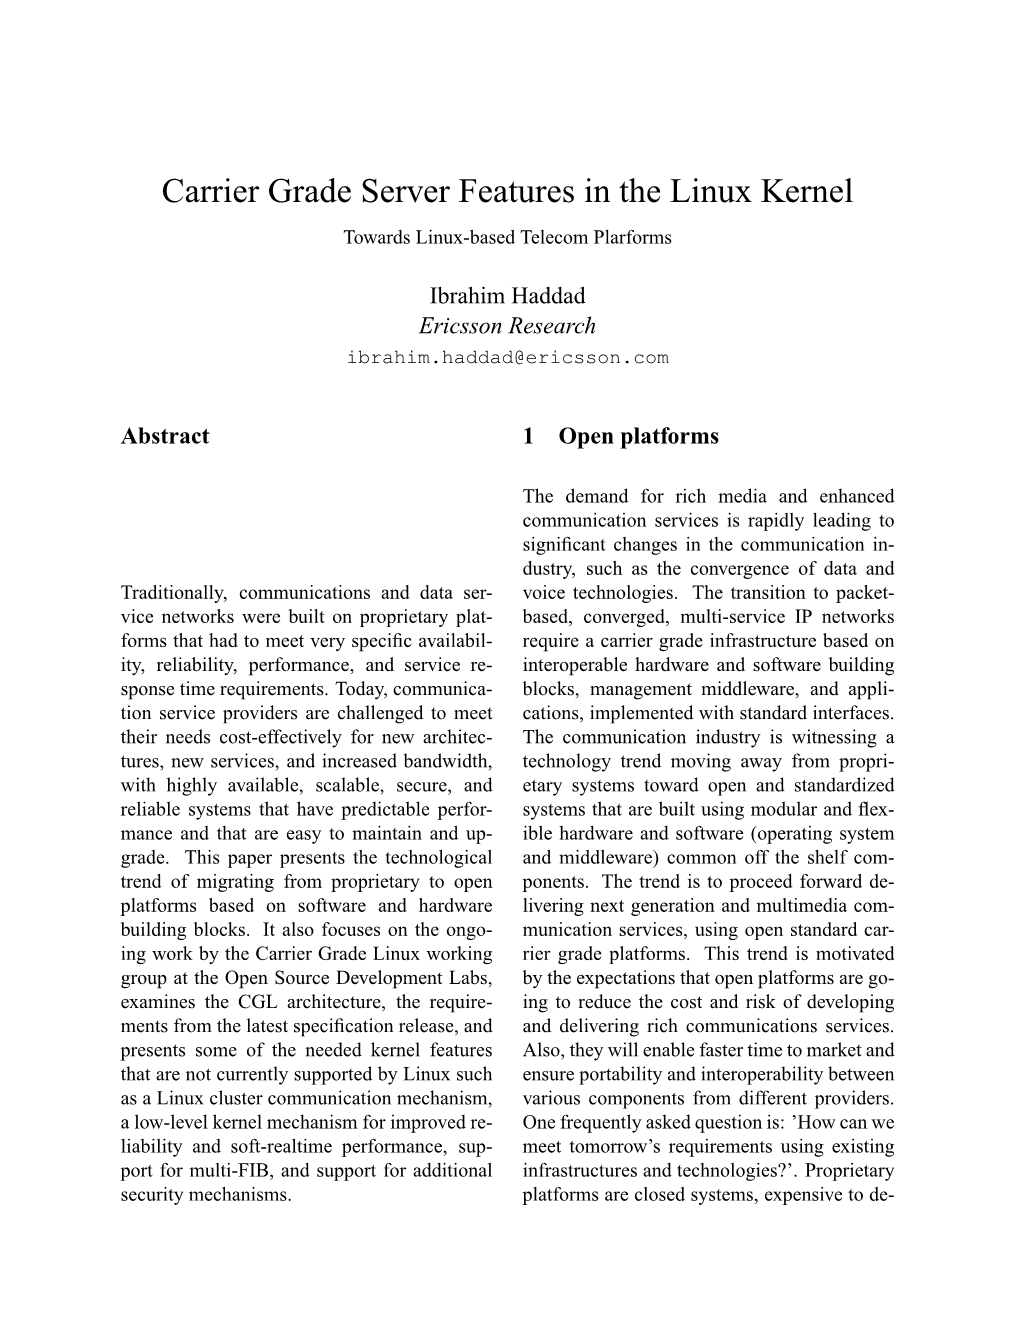 Carrier Grade Server Features in the Linux Kernel Towards Linux-Based Telecom Plarforms